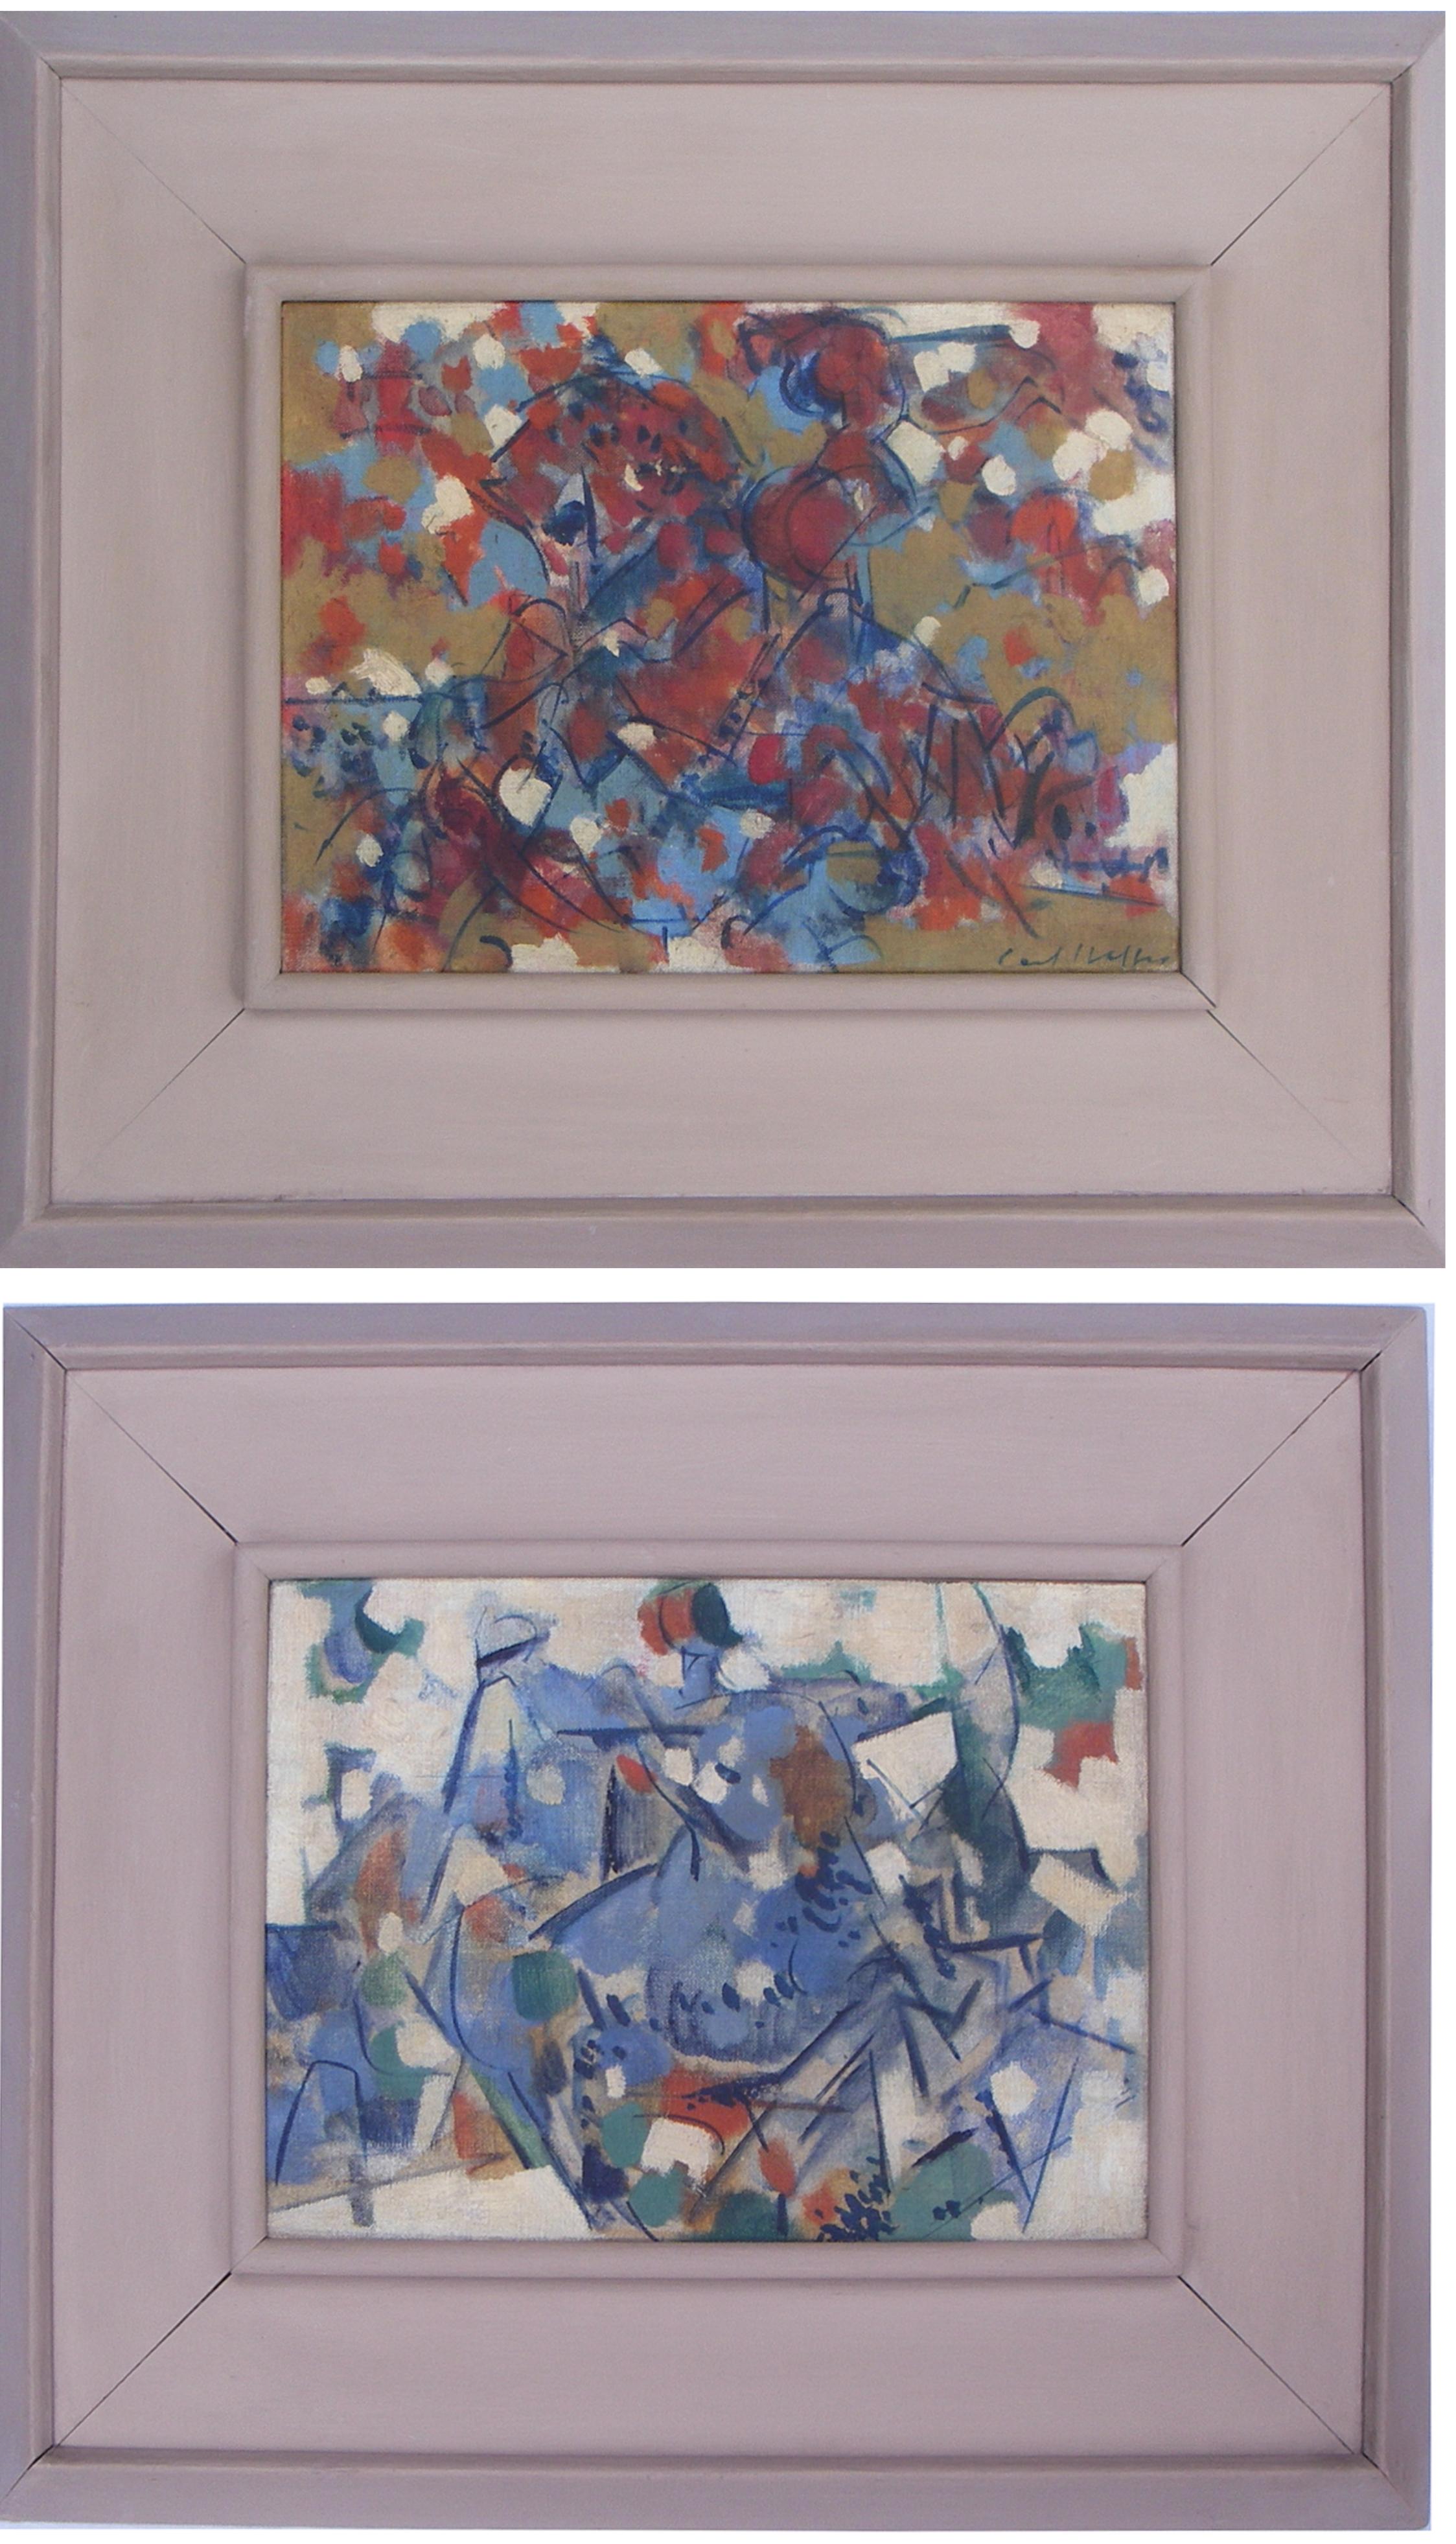 These works are only sold as a pair. Each painting measures 9" x 11" and framed 18" x 20.25" x 2.5"
The red and gold work is signed "Carl Holty" in the lower right.

About this artists: Carl Holty was awakened to his interest in art as a child